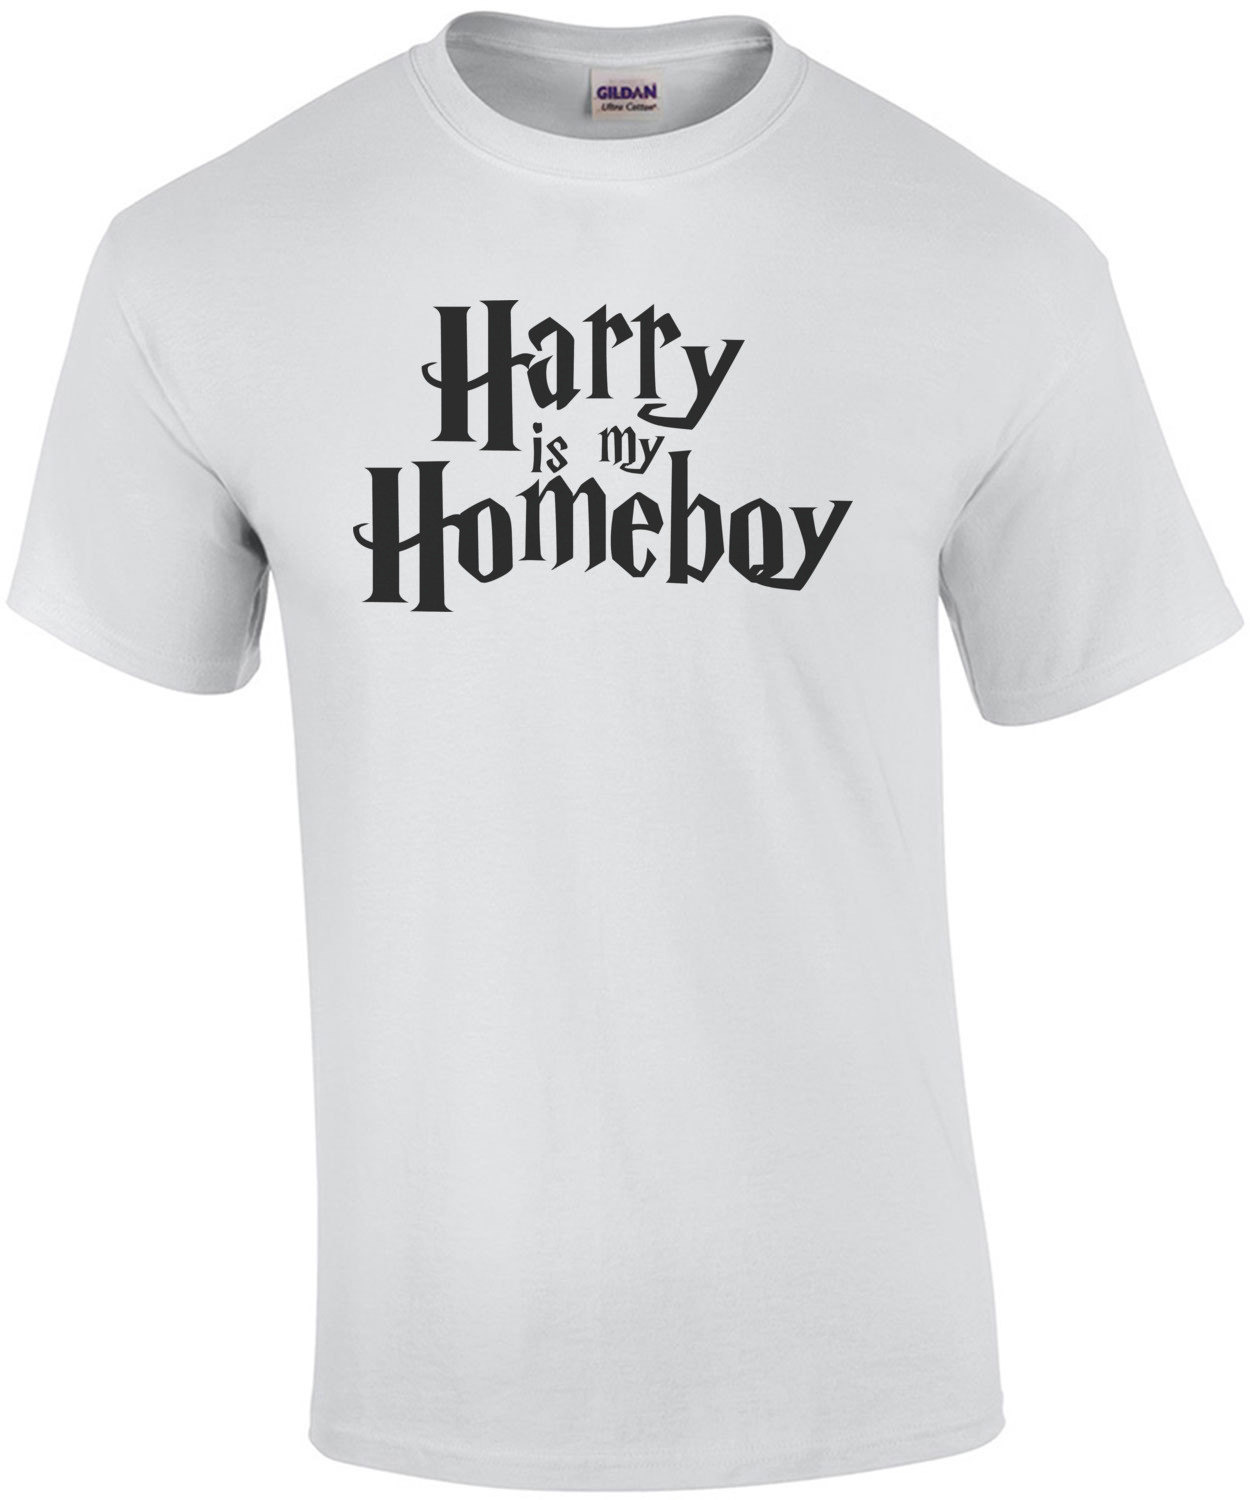 Harry is my homeboy - Harry Potter t-shirt